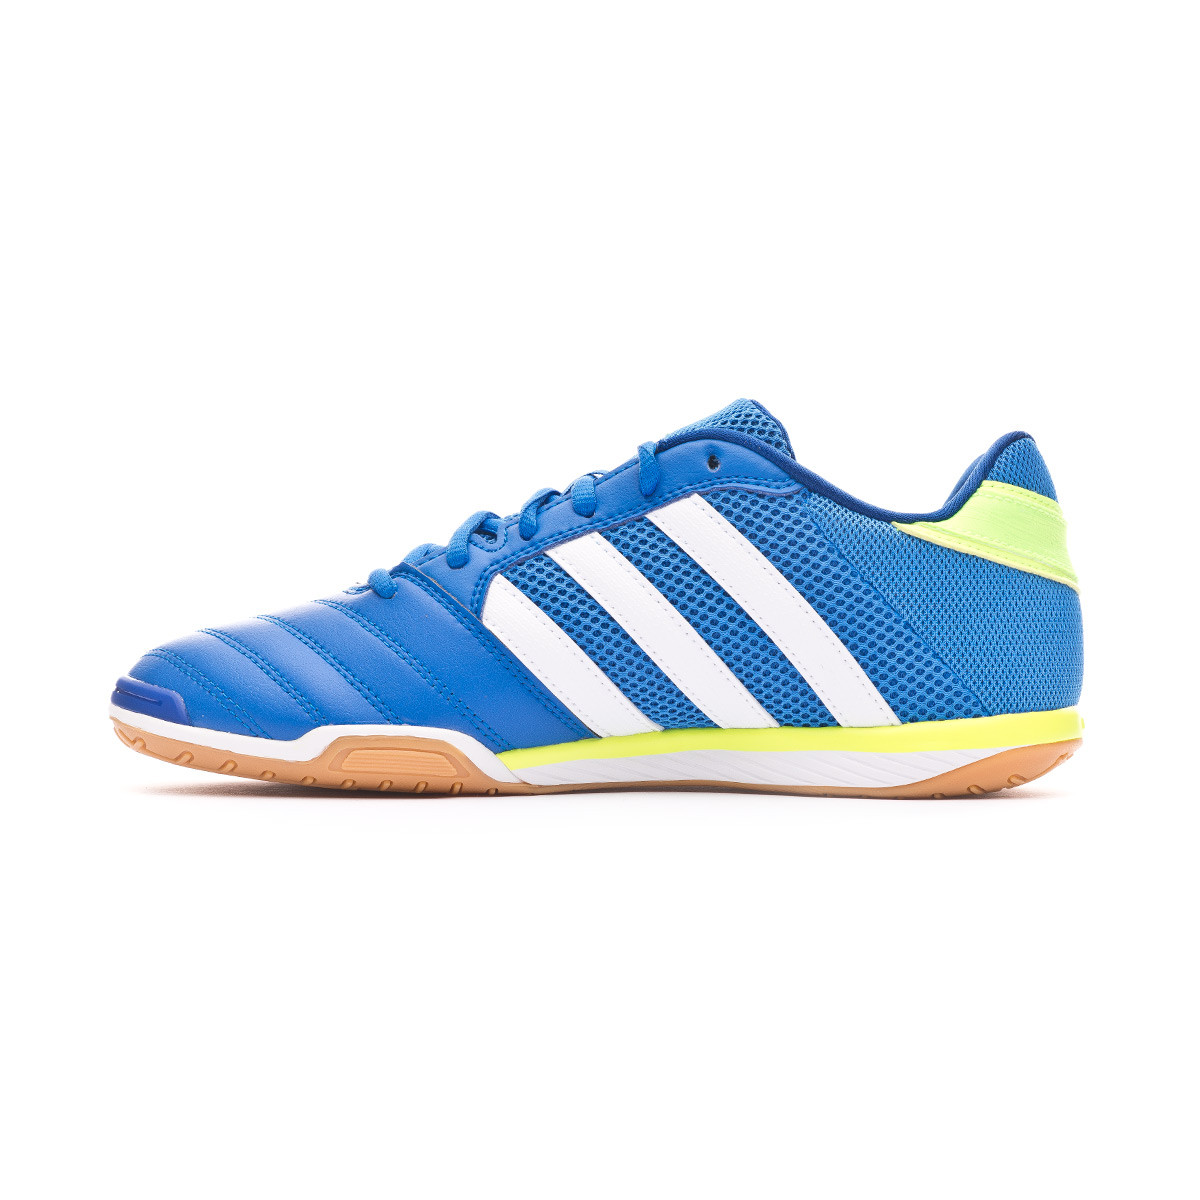 Indoor boots adidas Top Sala Glory Blue-White-Royal Blue - Fútbol Emotion